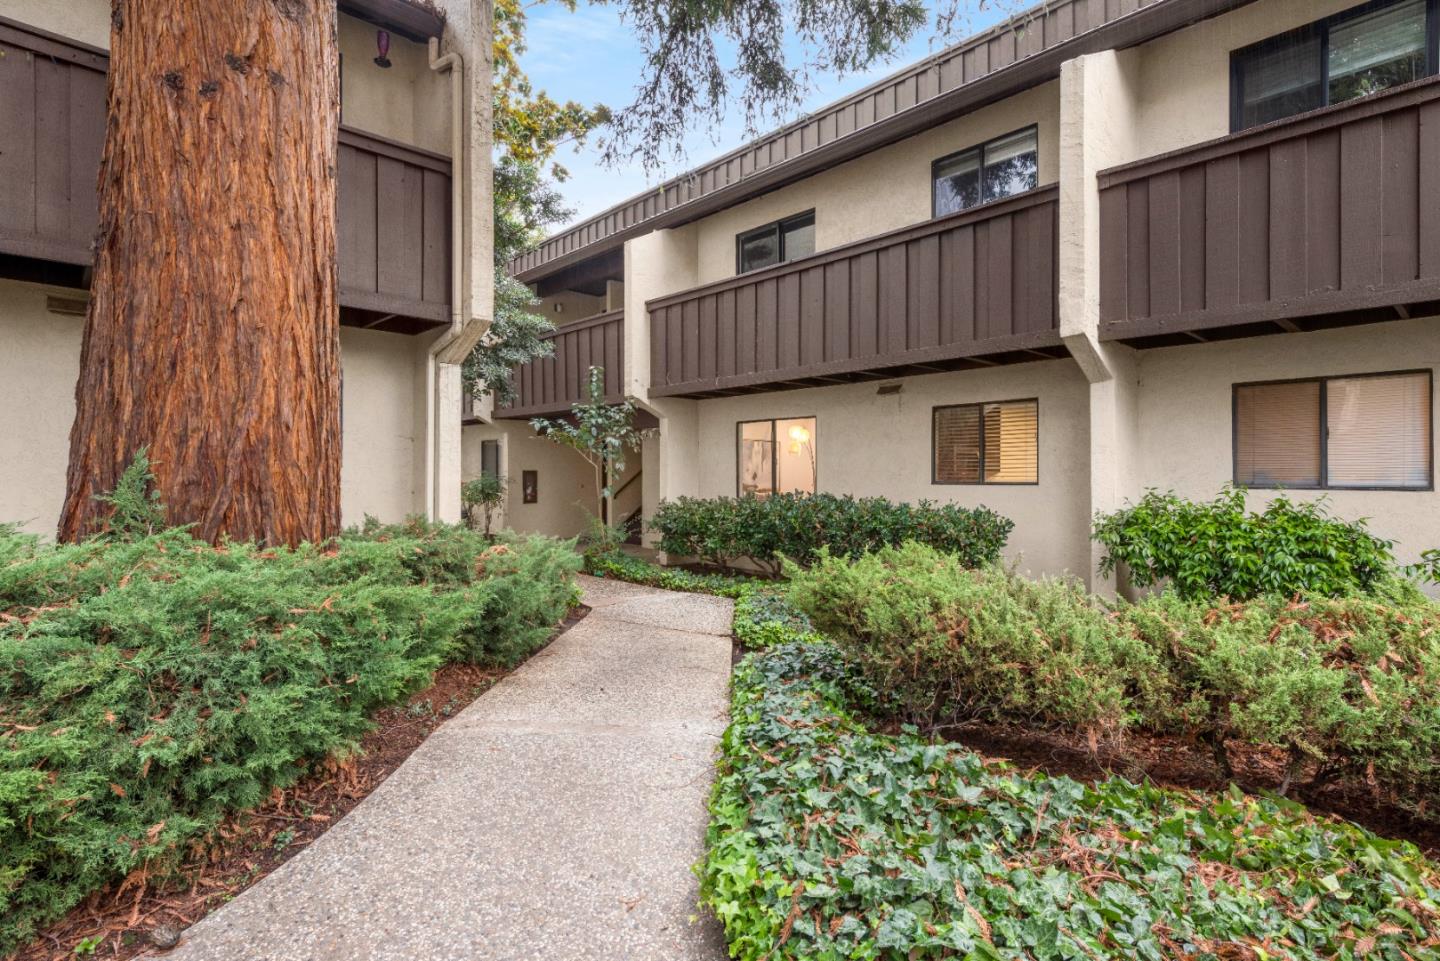 Spacious ground floor unit, freshly painted, recessed lights. Centrally located in desirable Sunnyvale, the Courtyard is a park like setting. Convenient to Apple, Google and LinkedIn. Only minutes from downtown Sunnyvale, close to restaurants and shopping. Inside laundry, large patio perfect for entertaining, community pool and tennis court. Easy access to 101, 237, 85, 280, Lawrence/Central Expressway and Caltrain.